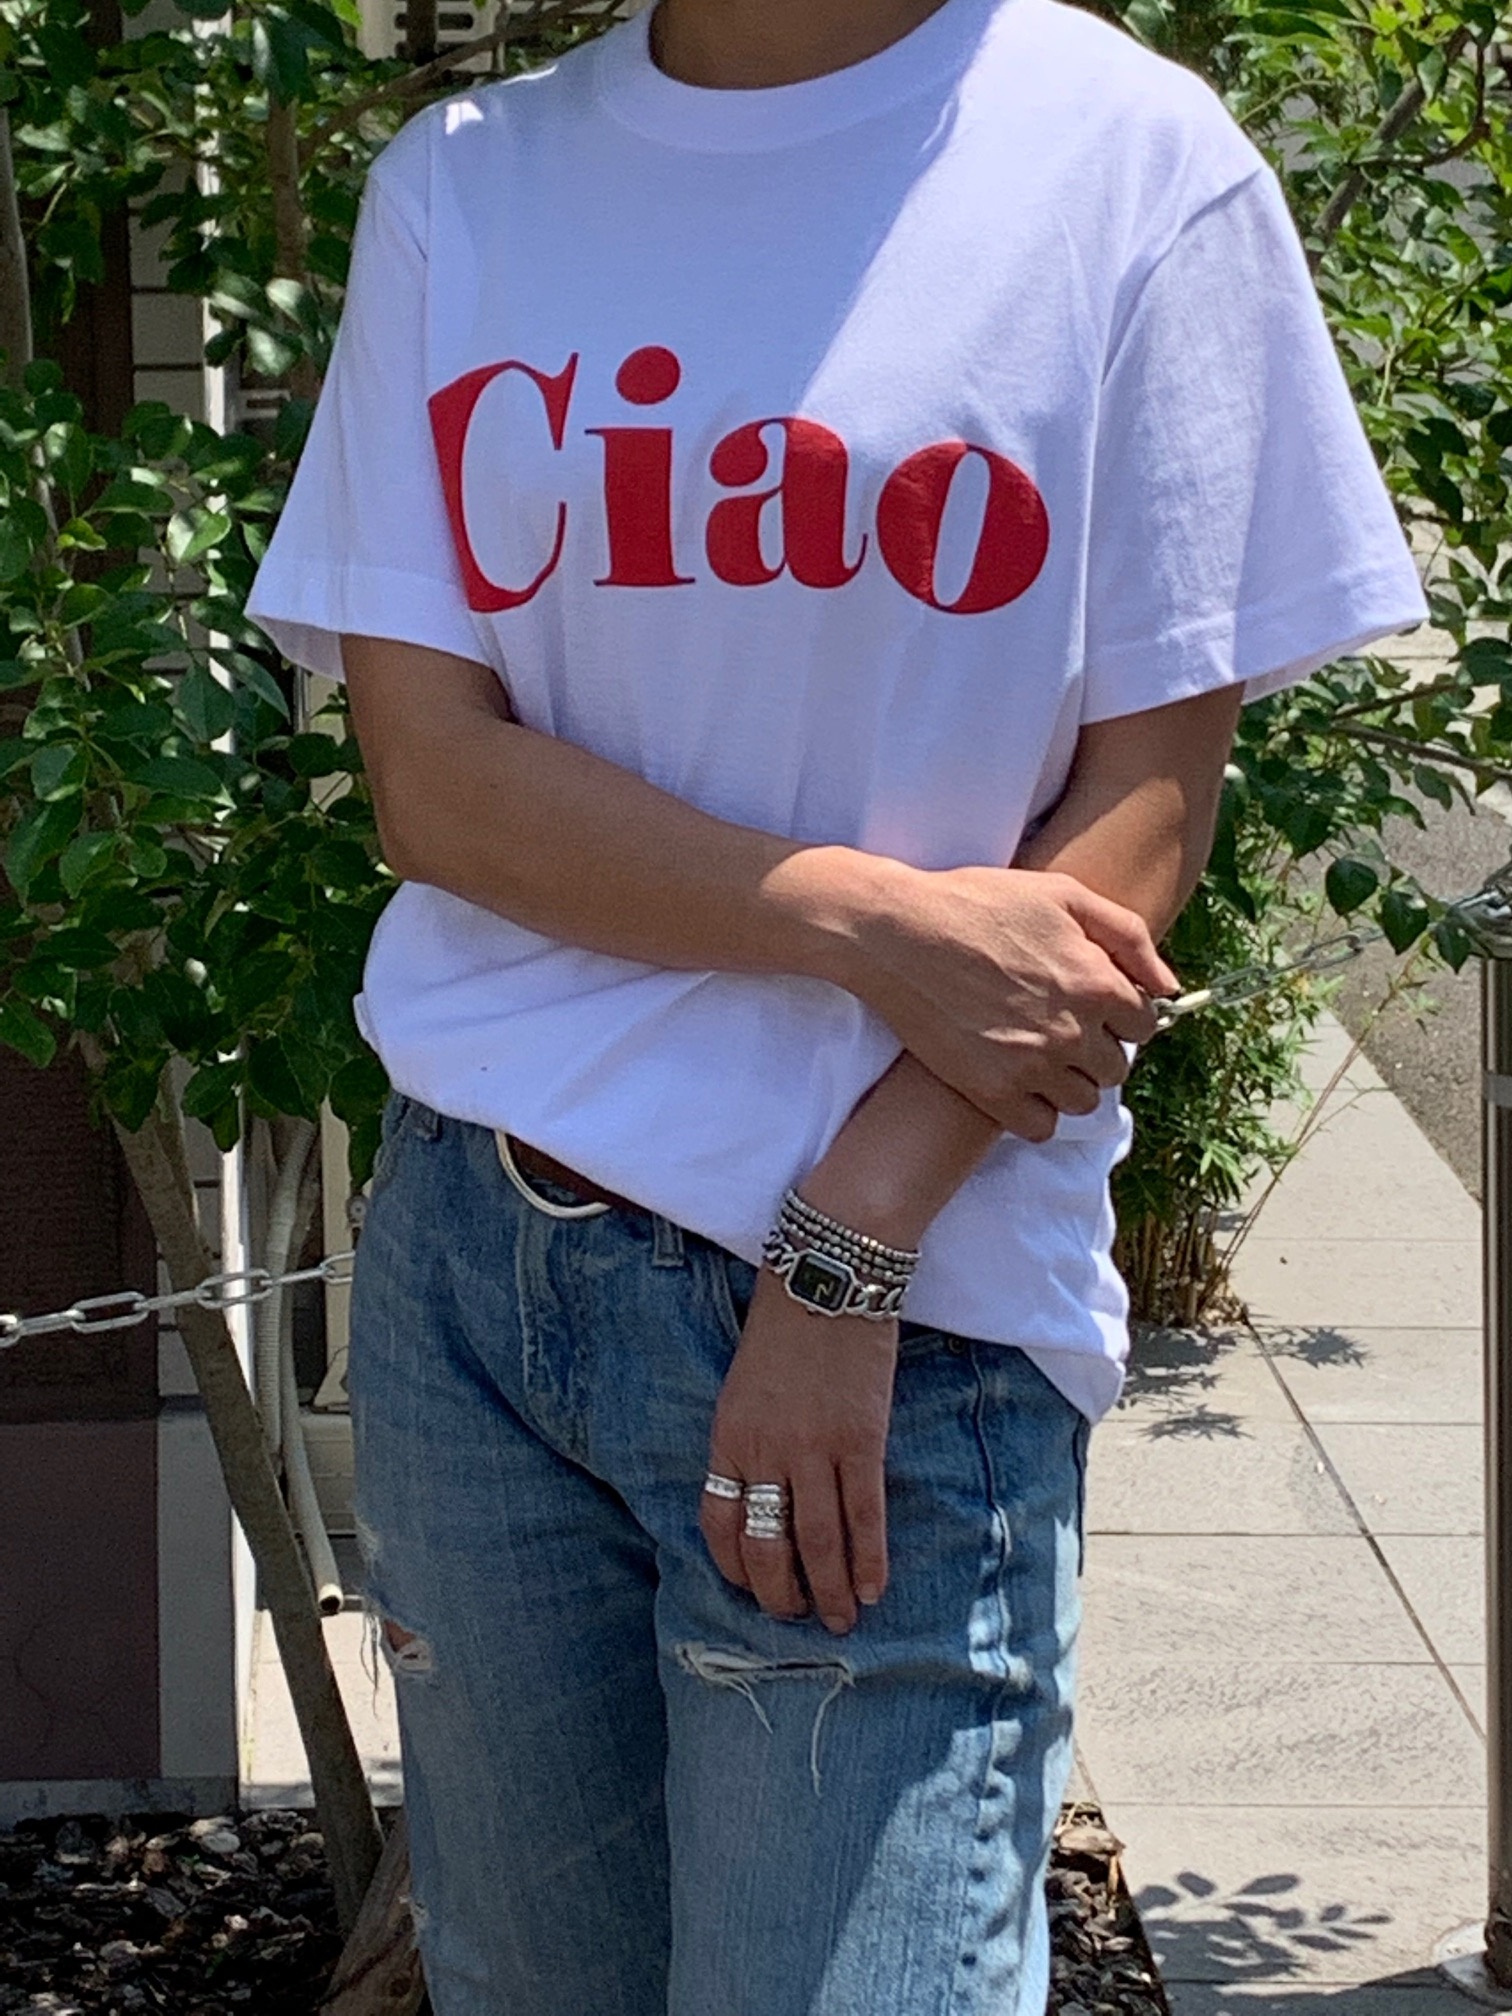 New item ☆ciao tee 　　